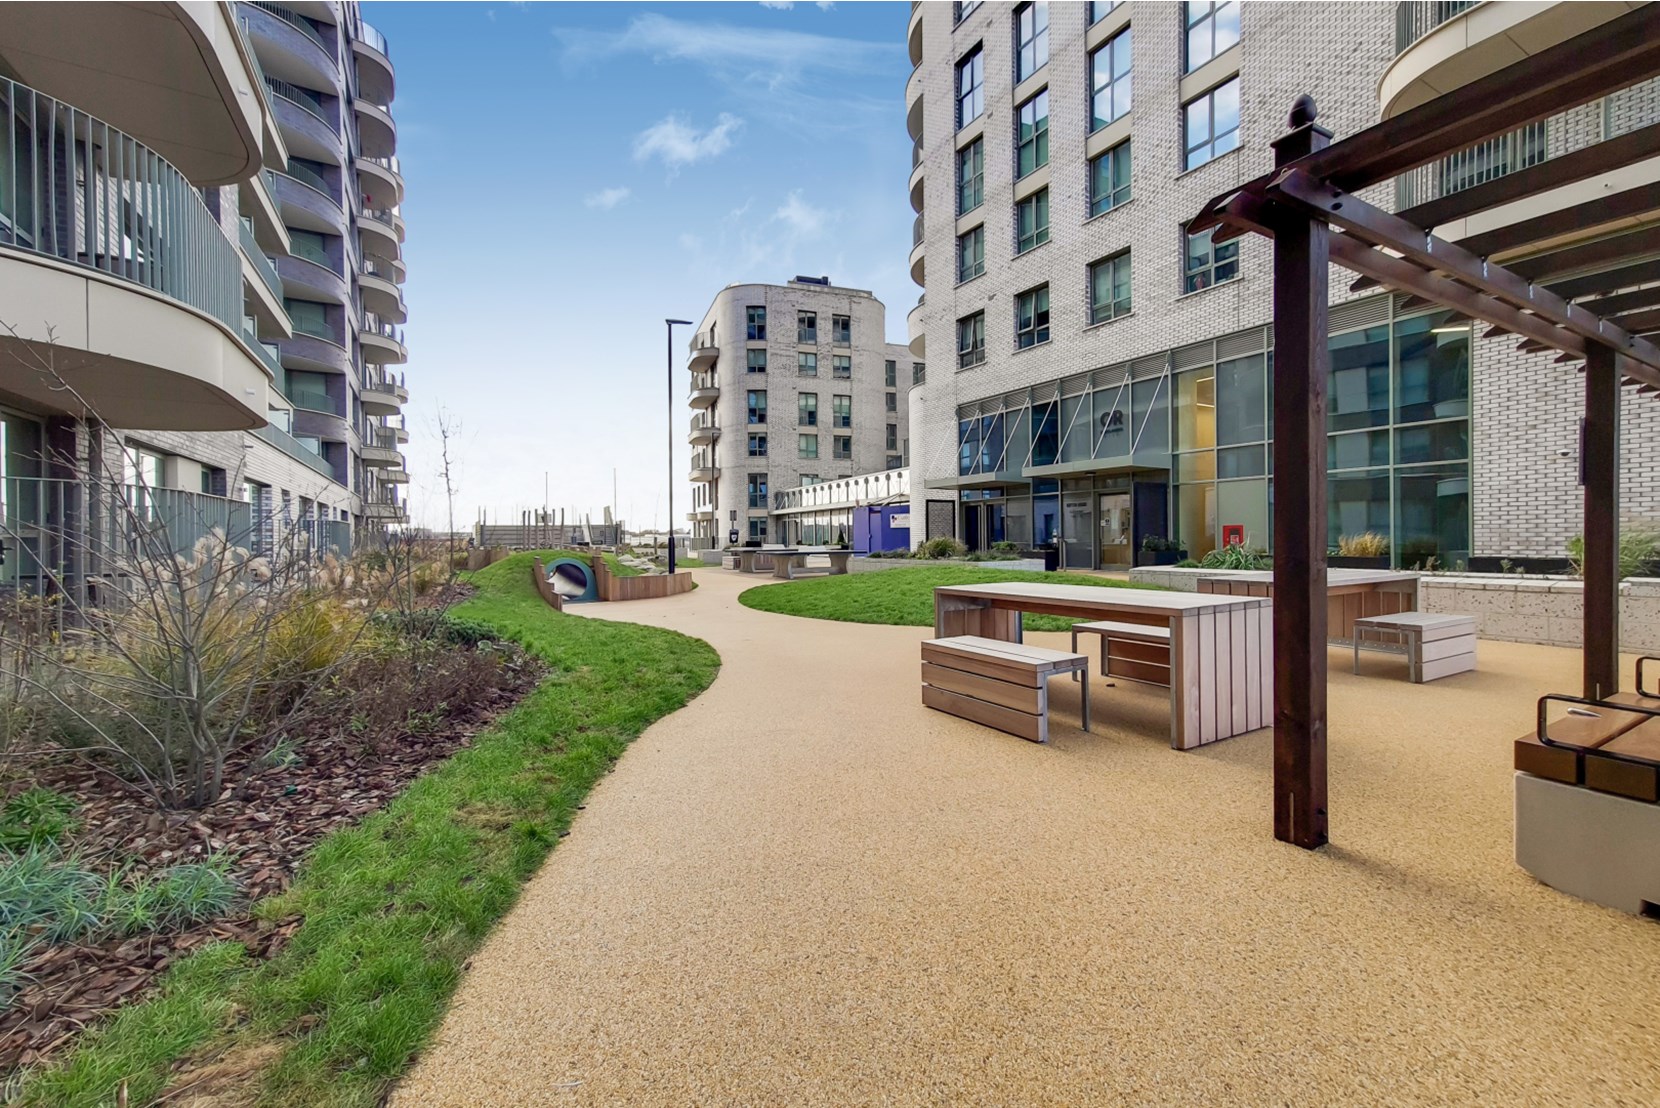 Apartments to Rent by Folio at Oaklands Rise, Brent, NW10, communal gardens